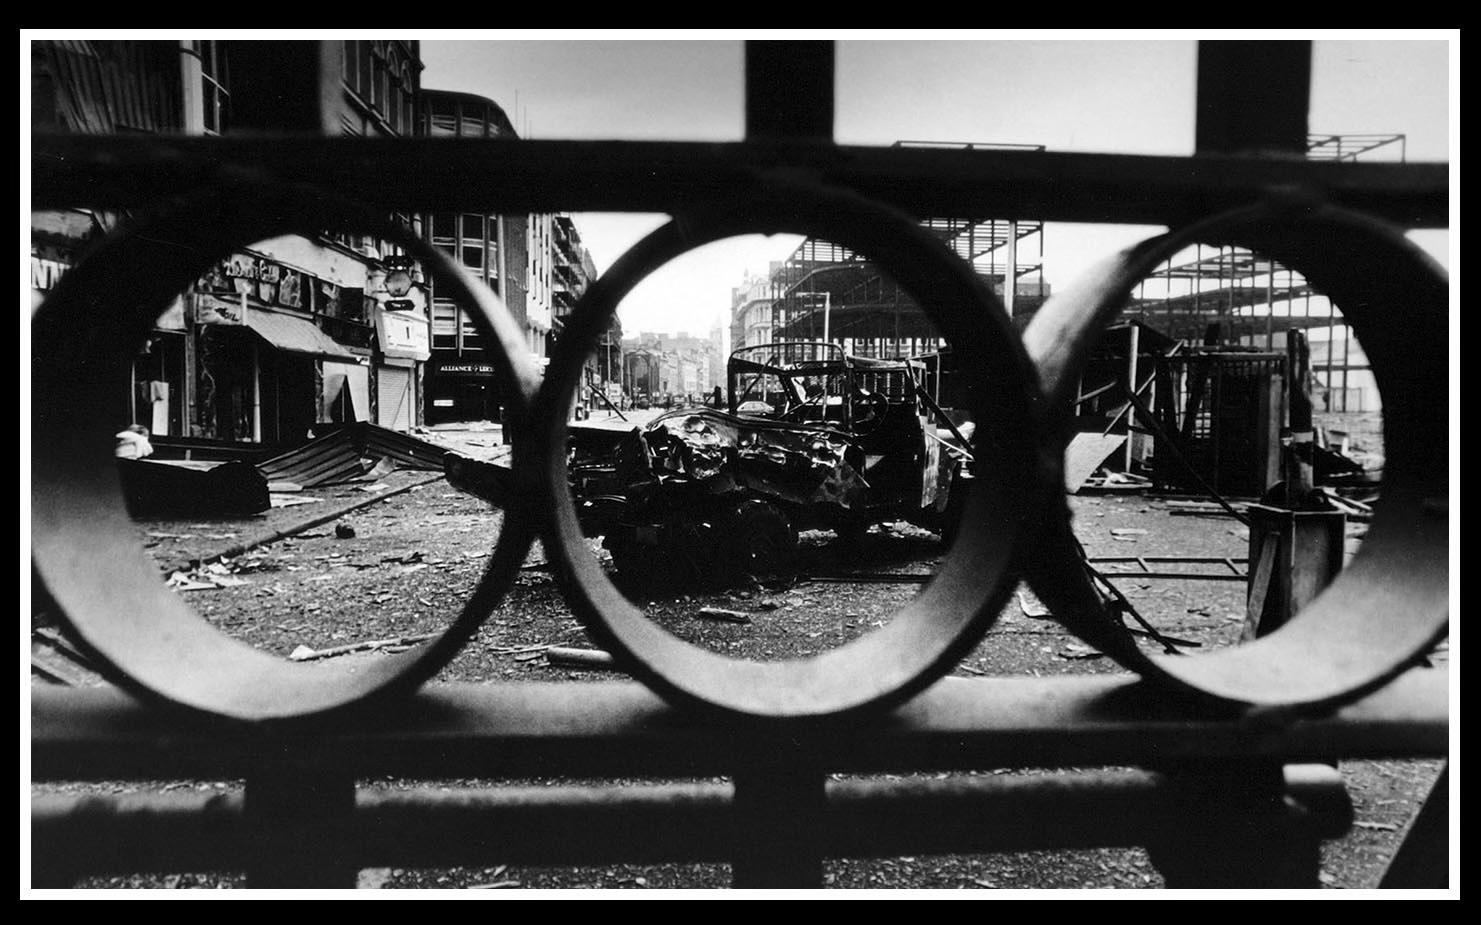 The Ring of Steel was a security cordon constructed in Belfast, Ireland during the Troubles Era to keep bombers from entering the city's commercial district. This undated image shows the aftermath of an explosion outside the Royal Avenue checkpoint.